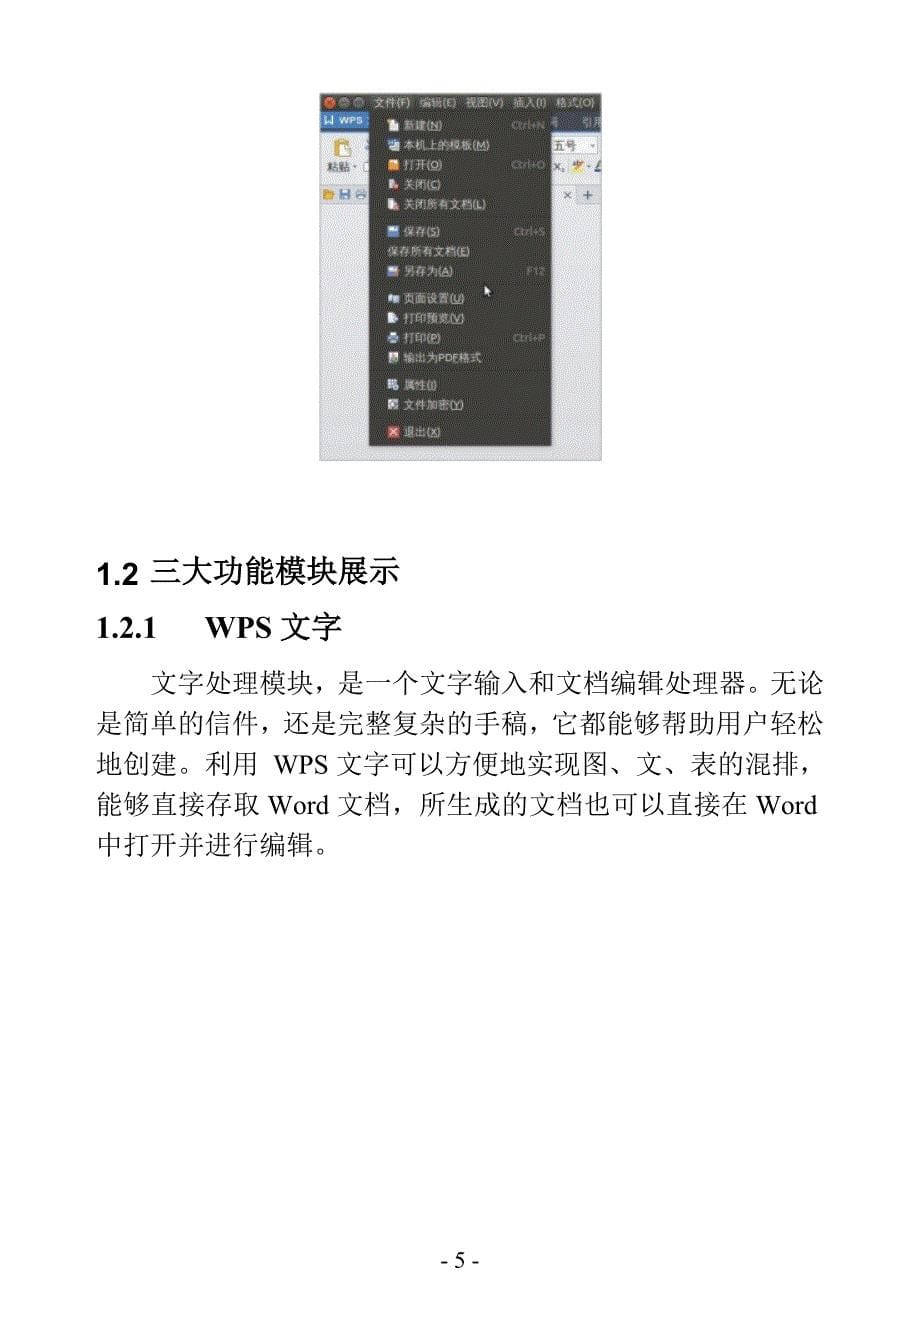 WPS Office for linux快速入门指南_第5页